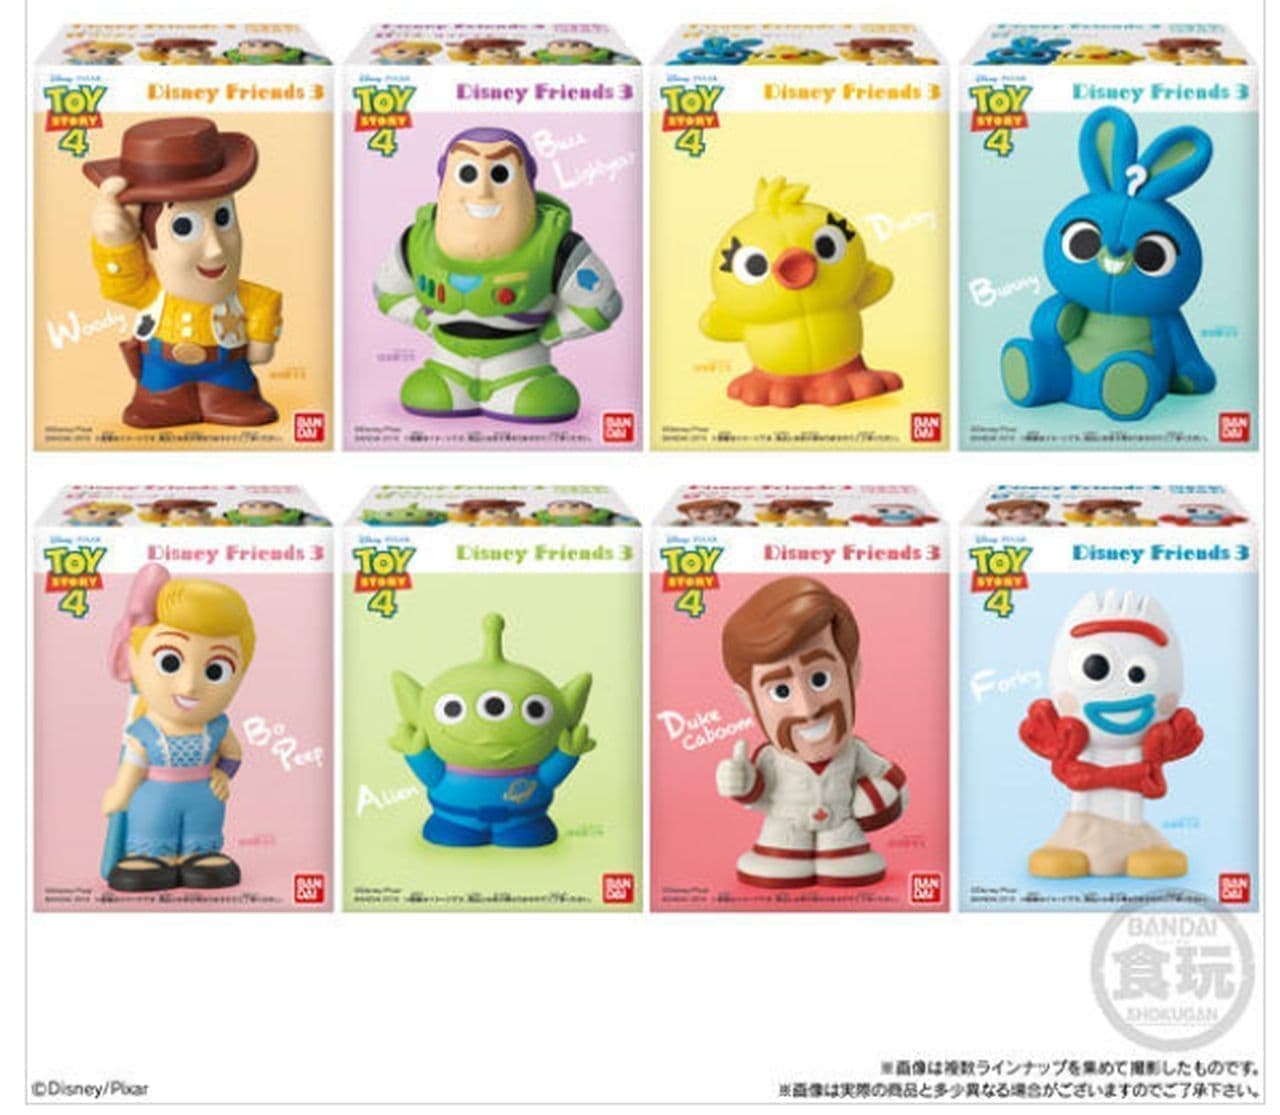 Bandai Candy Division "Disney Friends Minifigure 3 TOY STORY 4"